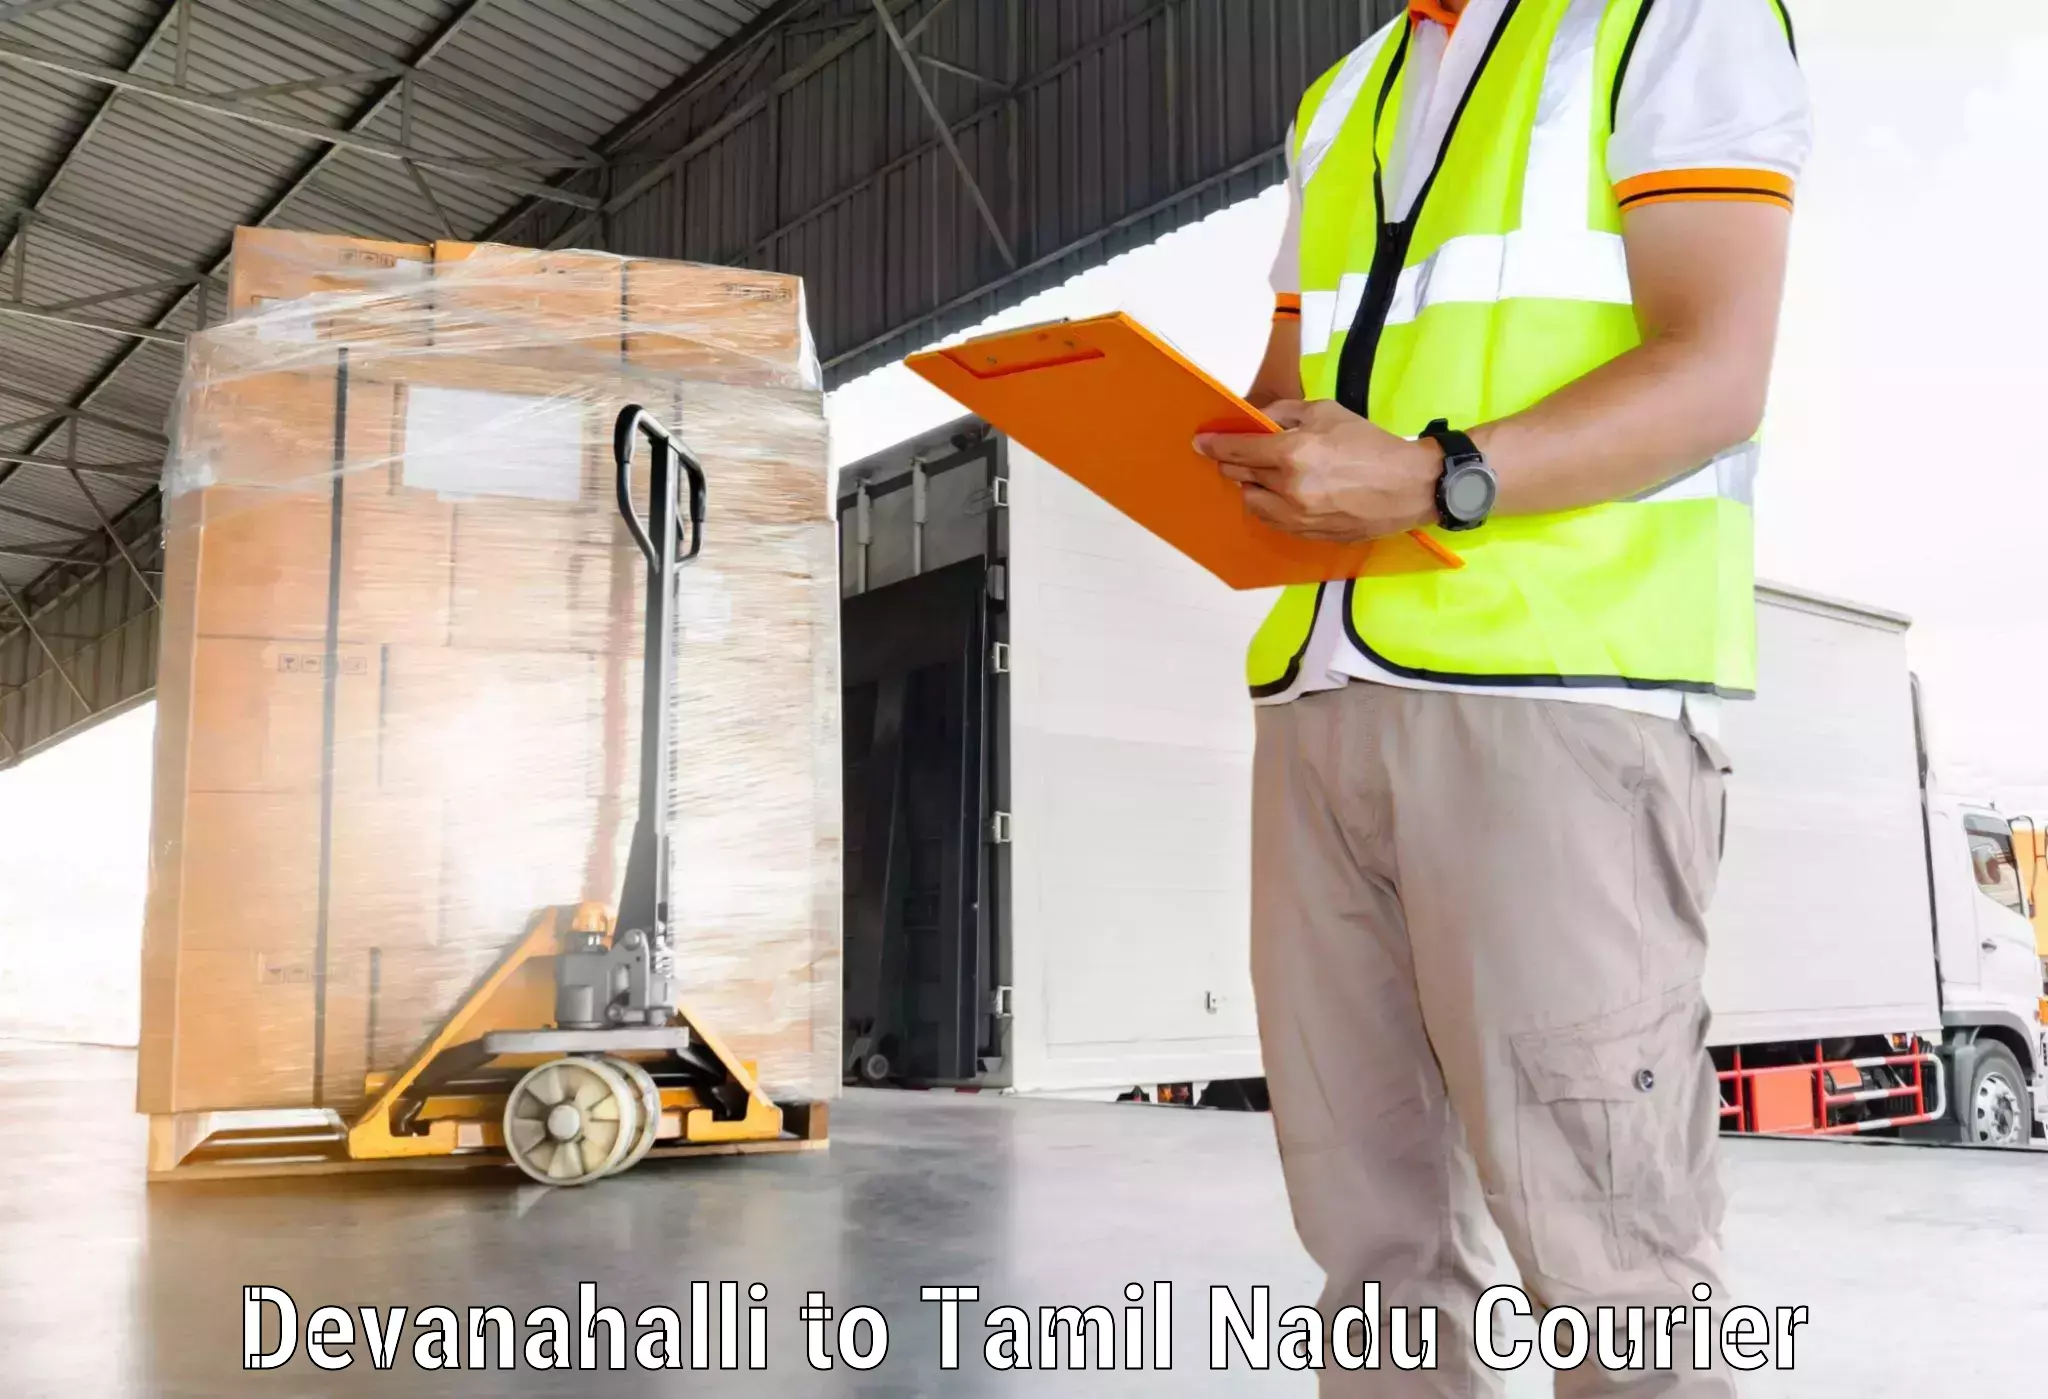 State-of-the-art courier technology Devanahalli to Sivakasi